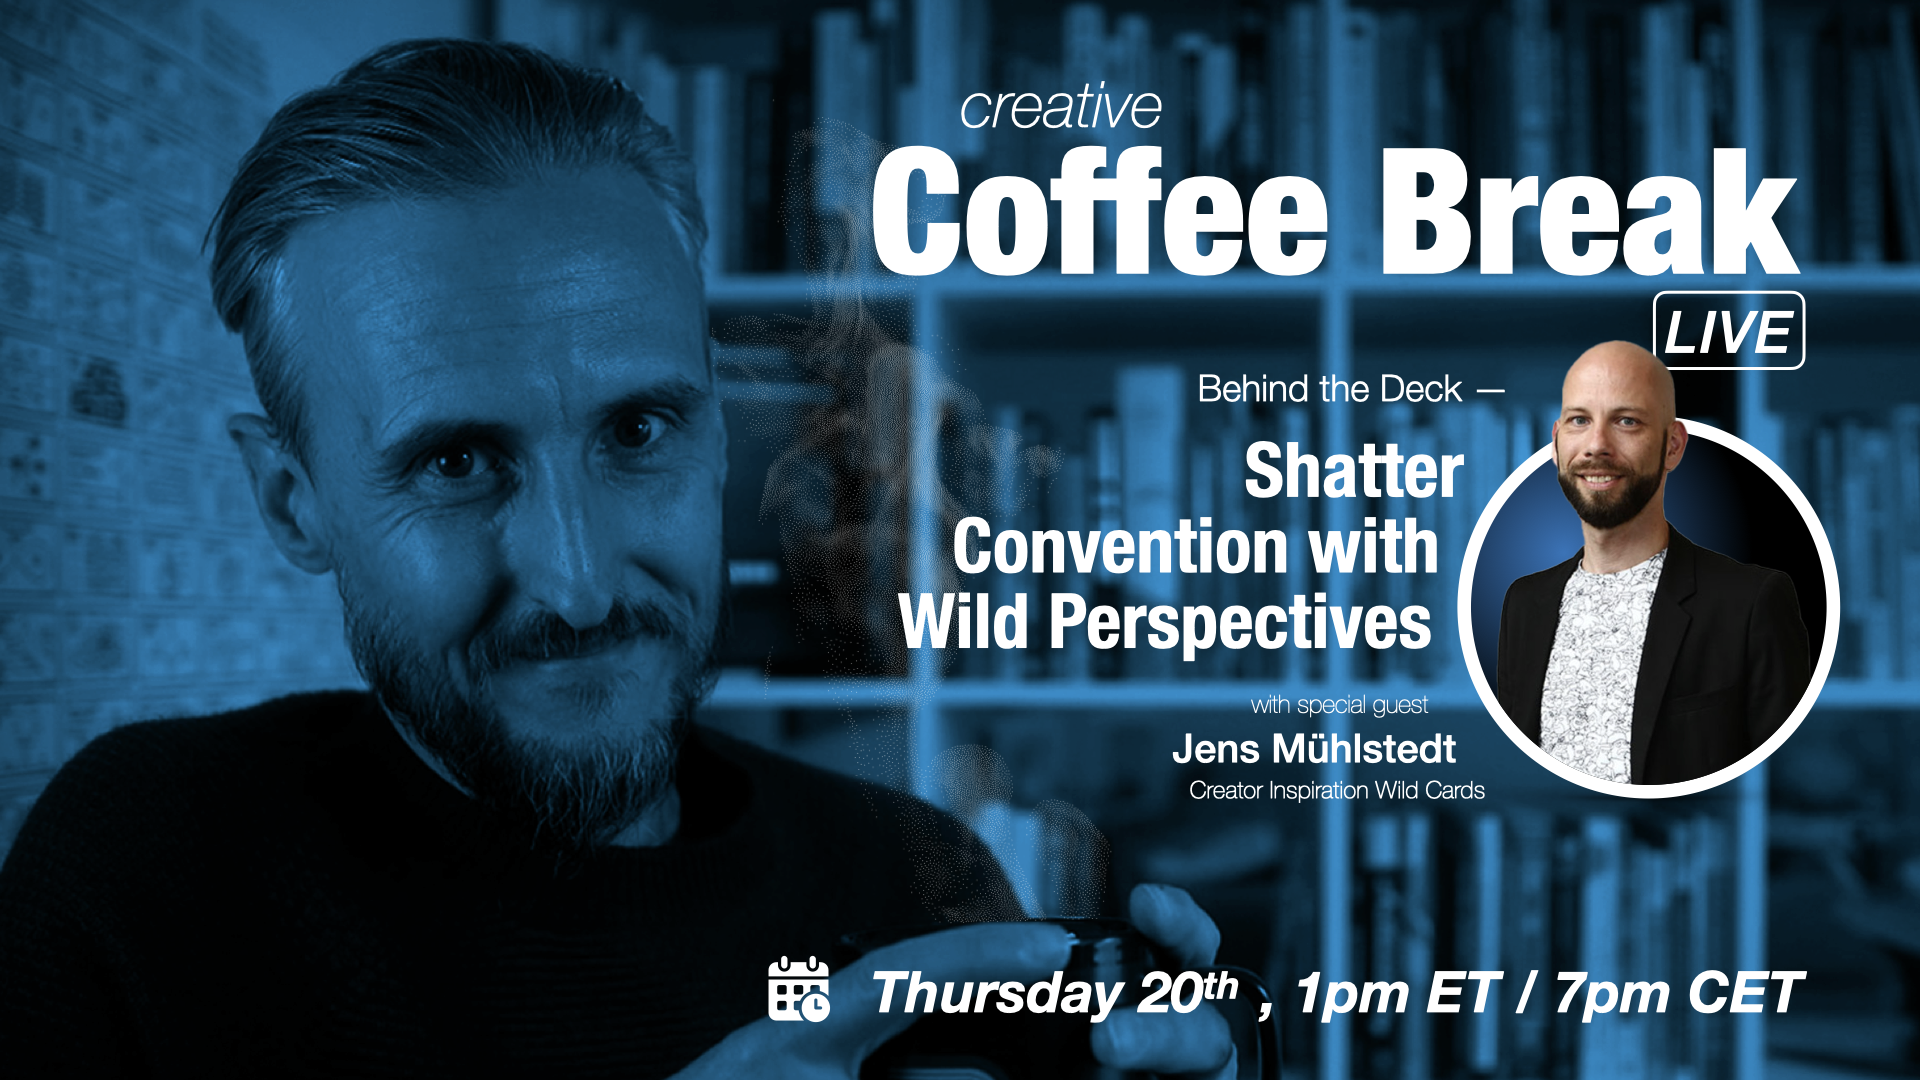 Behind the Deck — Shatter convention with wild perspectives